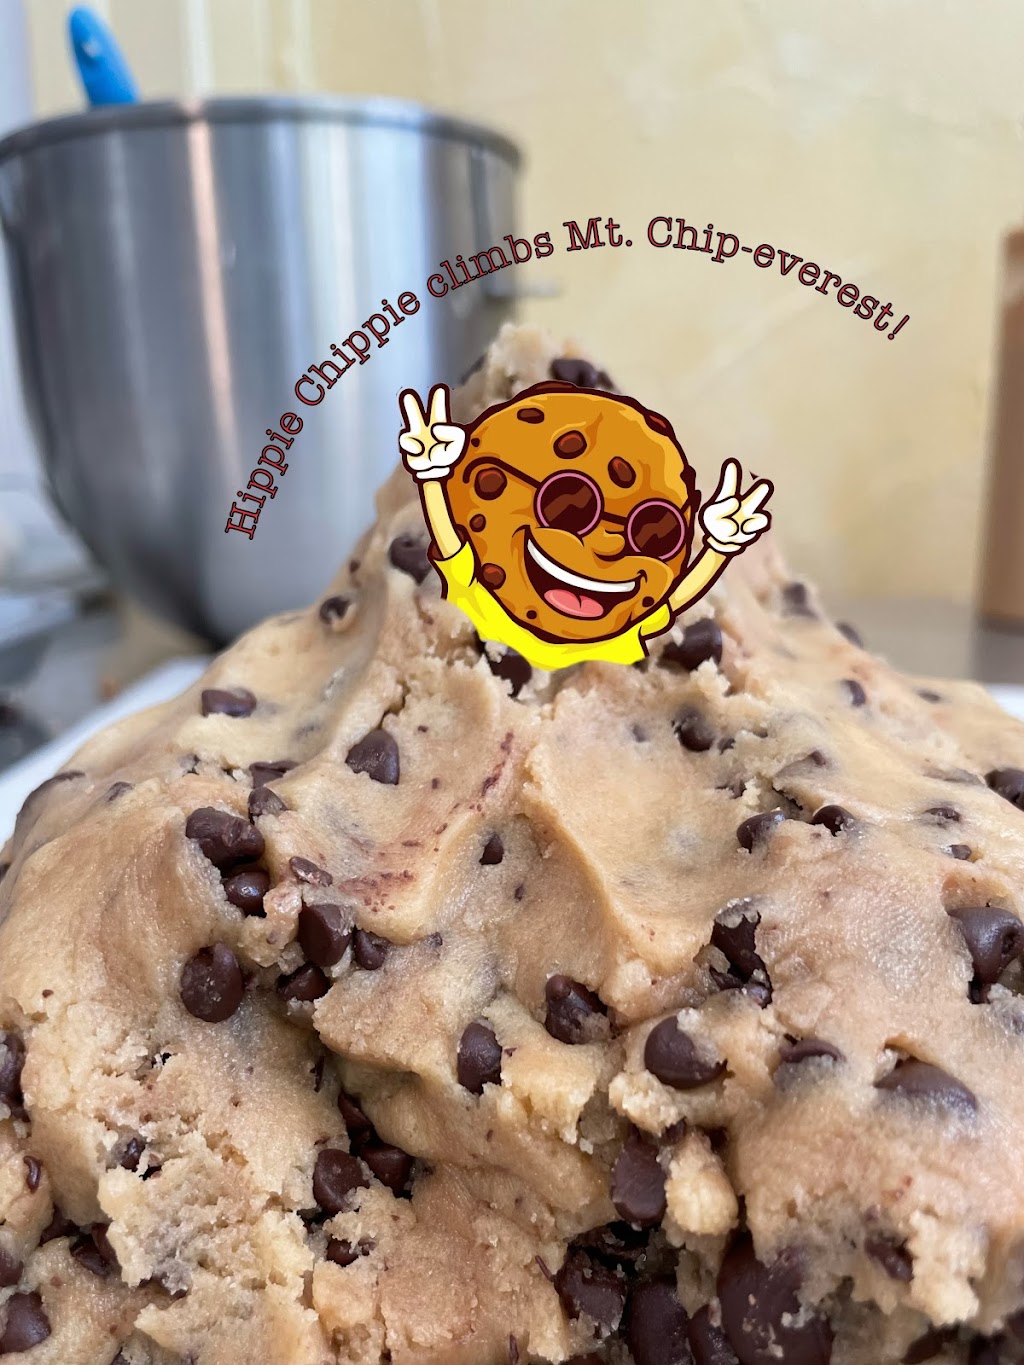 Hippie Chippie Cookie Company | 233 Main St, East Greenville, PA 18041 | Phone: (610) 410-9190